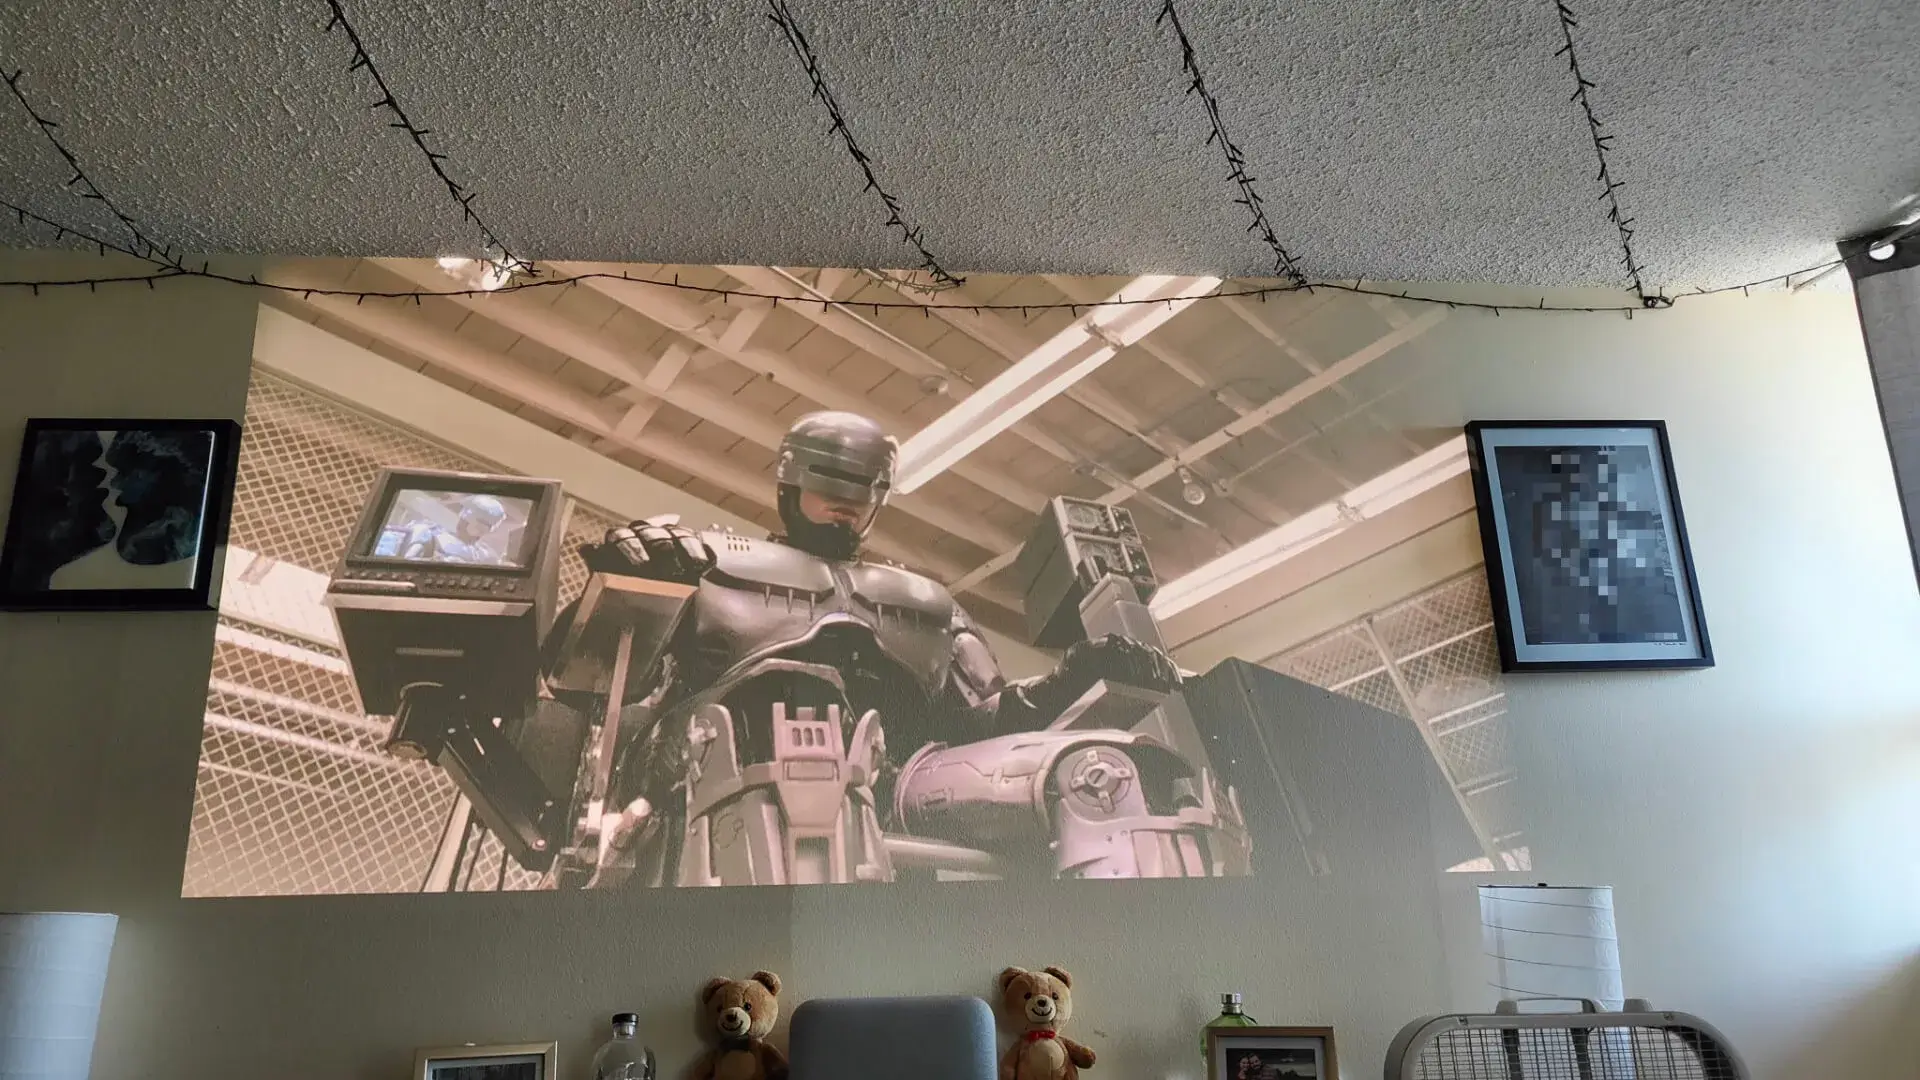 XGIMI Horizon UItra 4K Movie Playing the Robocop movie that's been remastered.